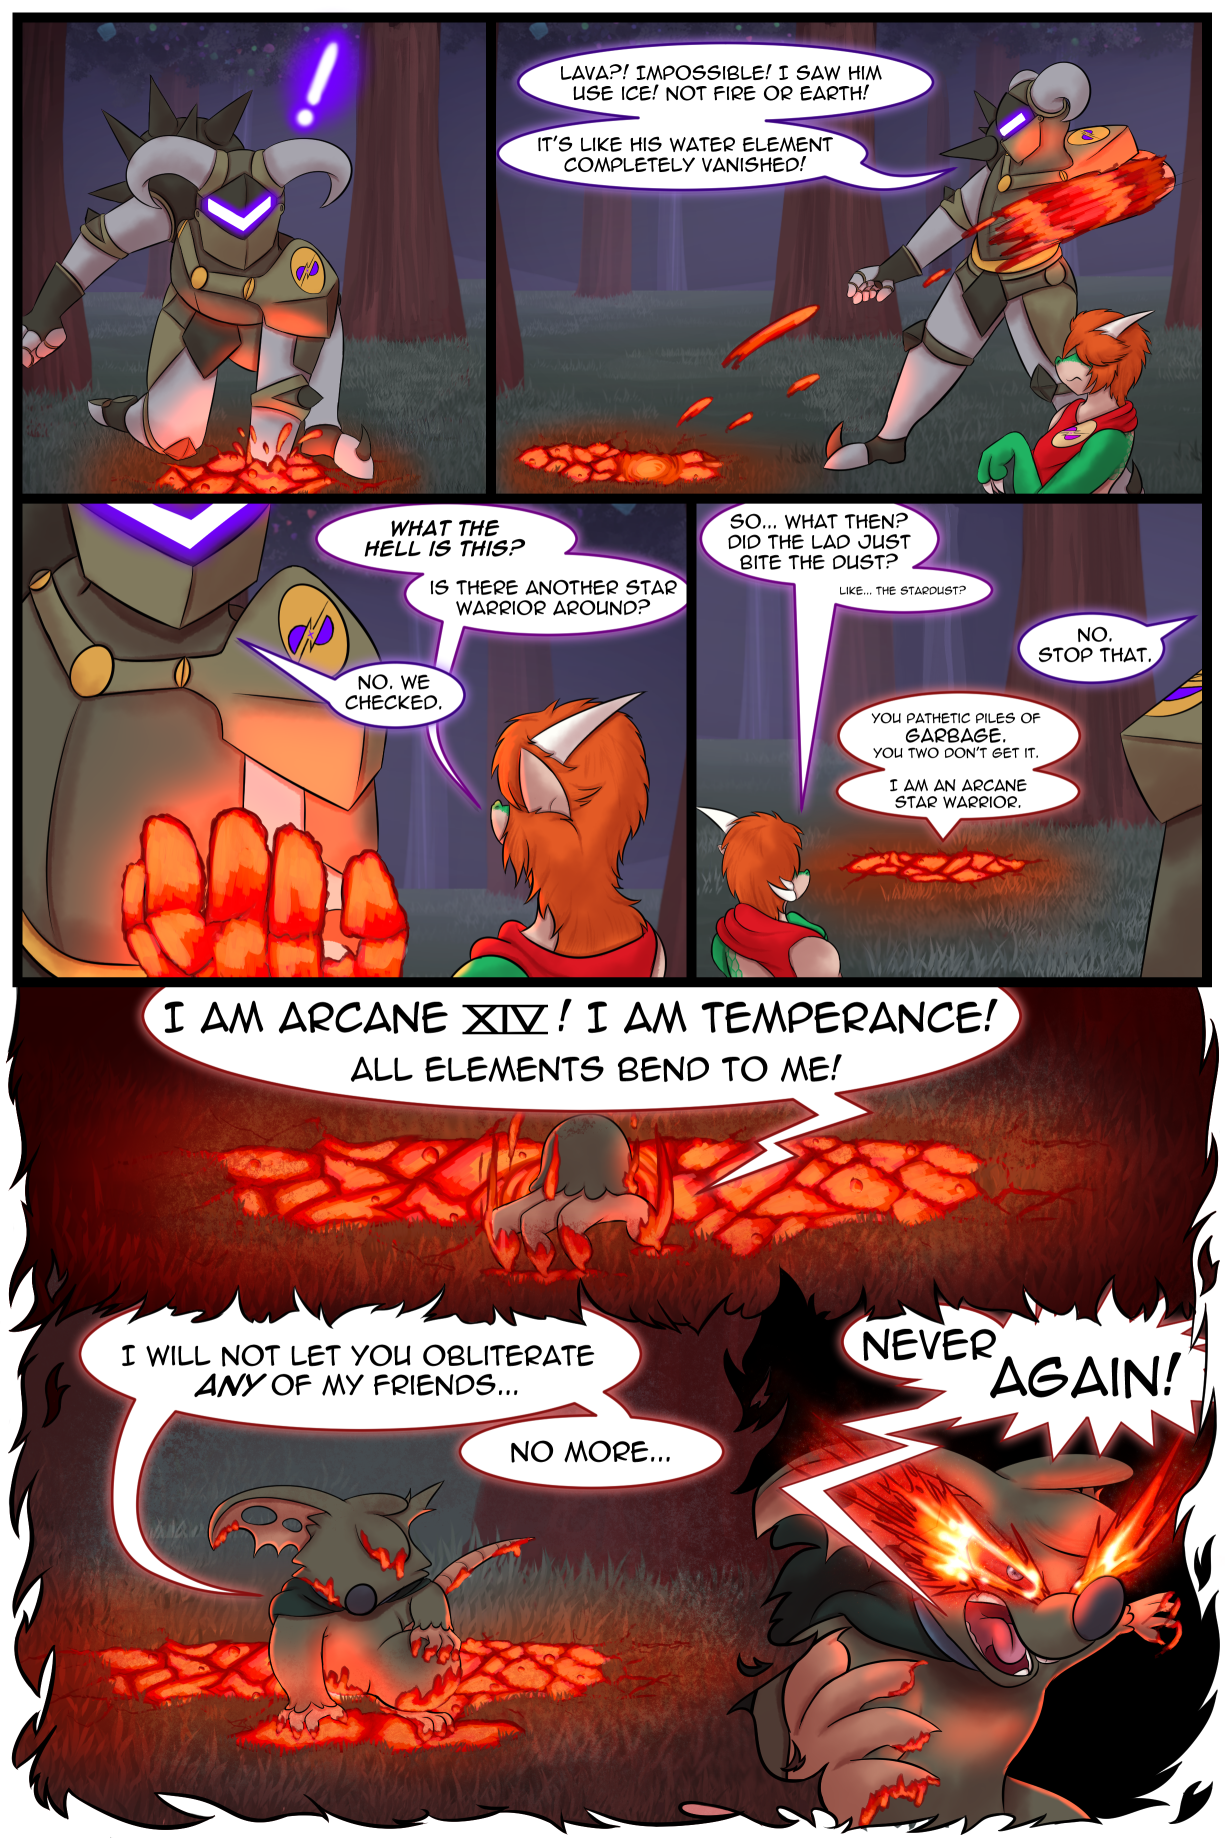 Ch5 Page 14 – Temperance